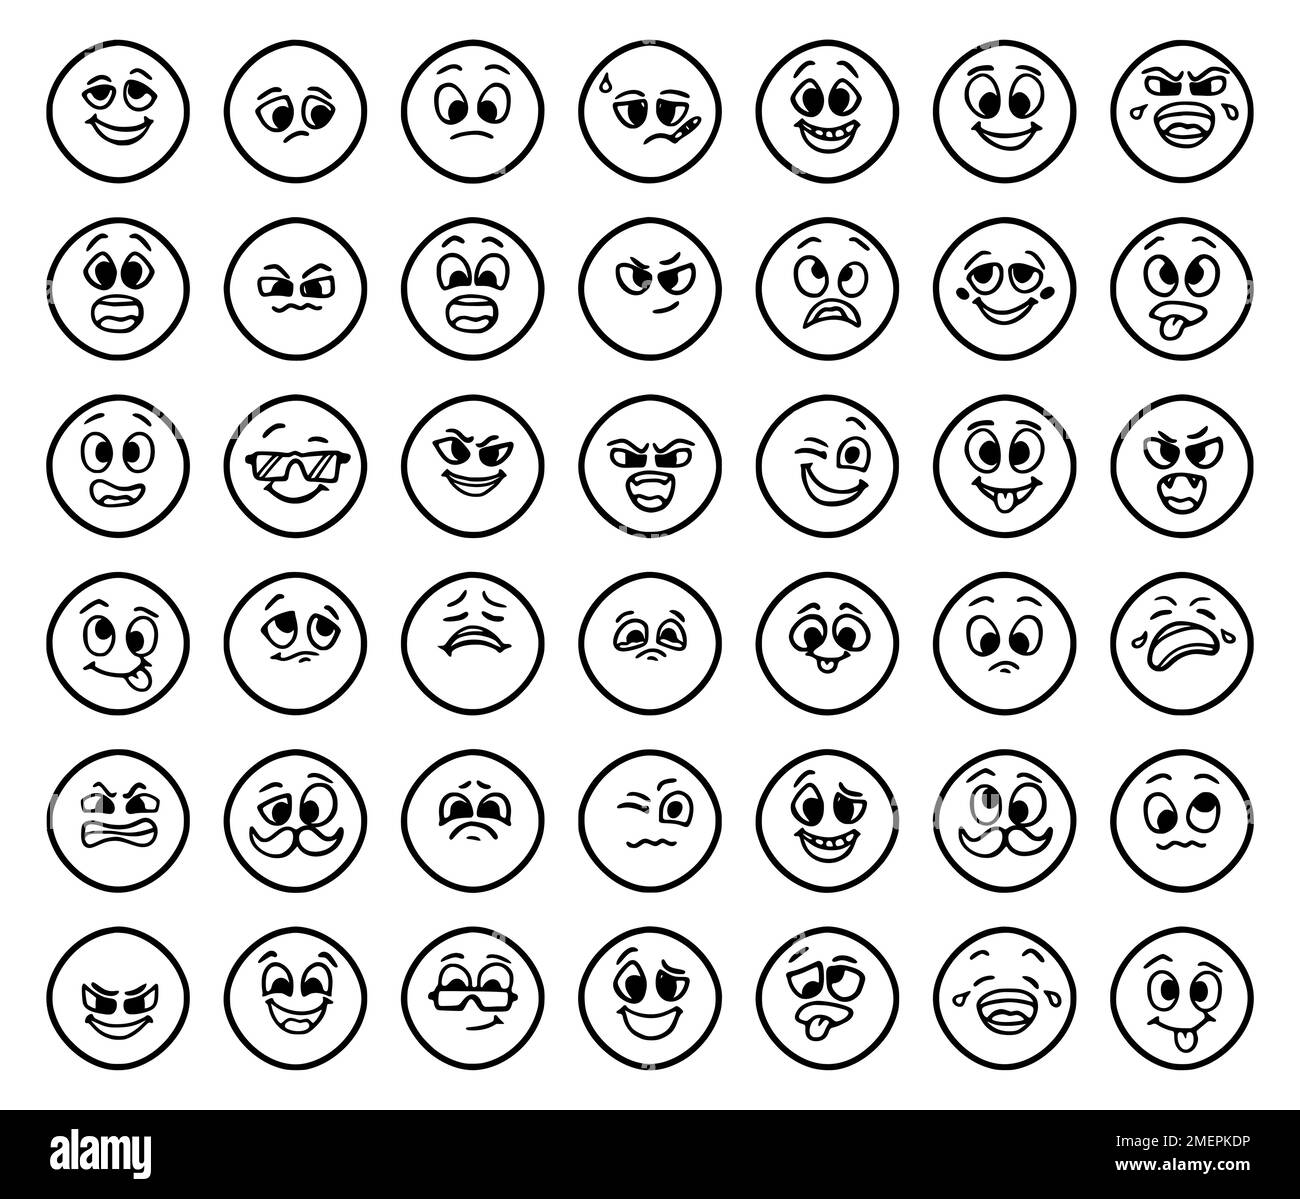 set-of-emoticons-showing-different-emotions-in-doodle-style-isolated-on